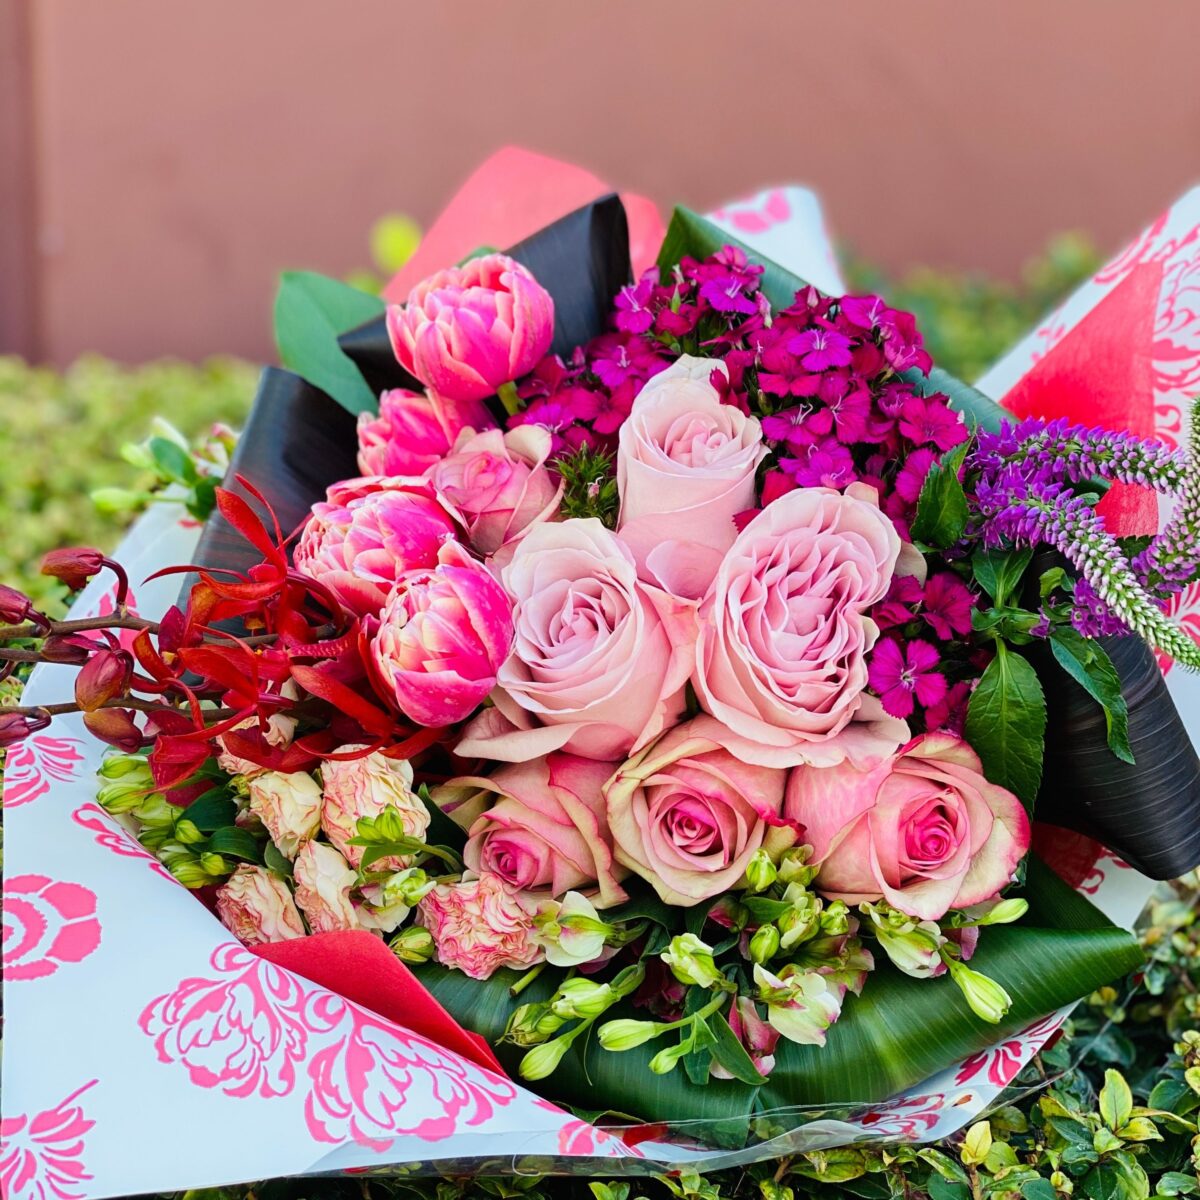 I love you gifts for her flowers